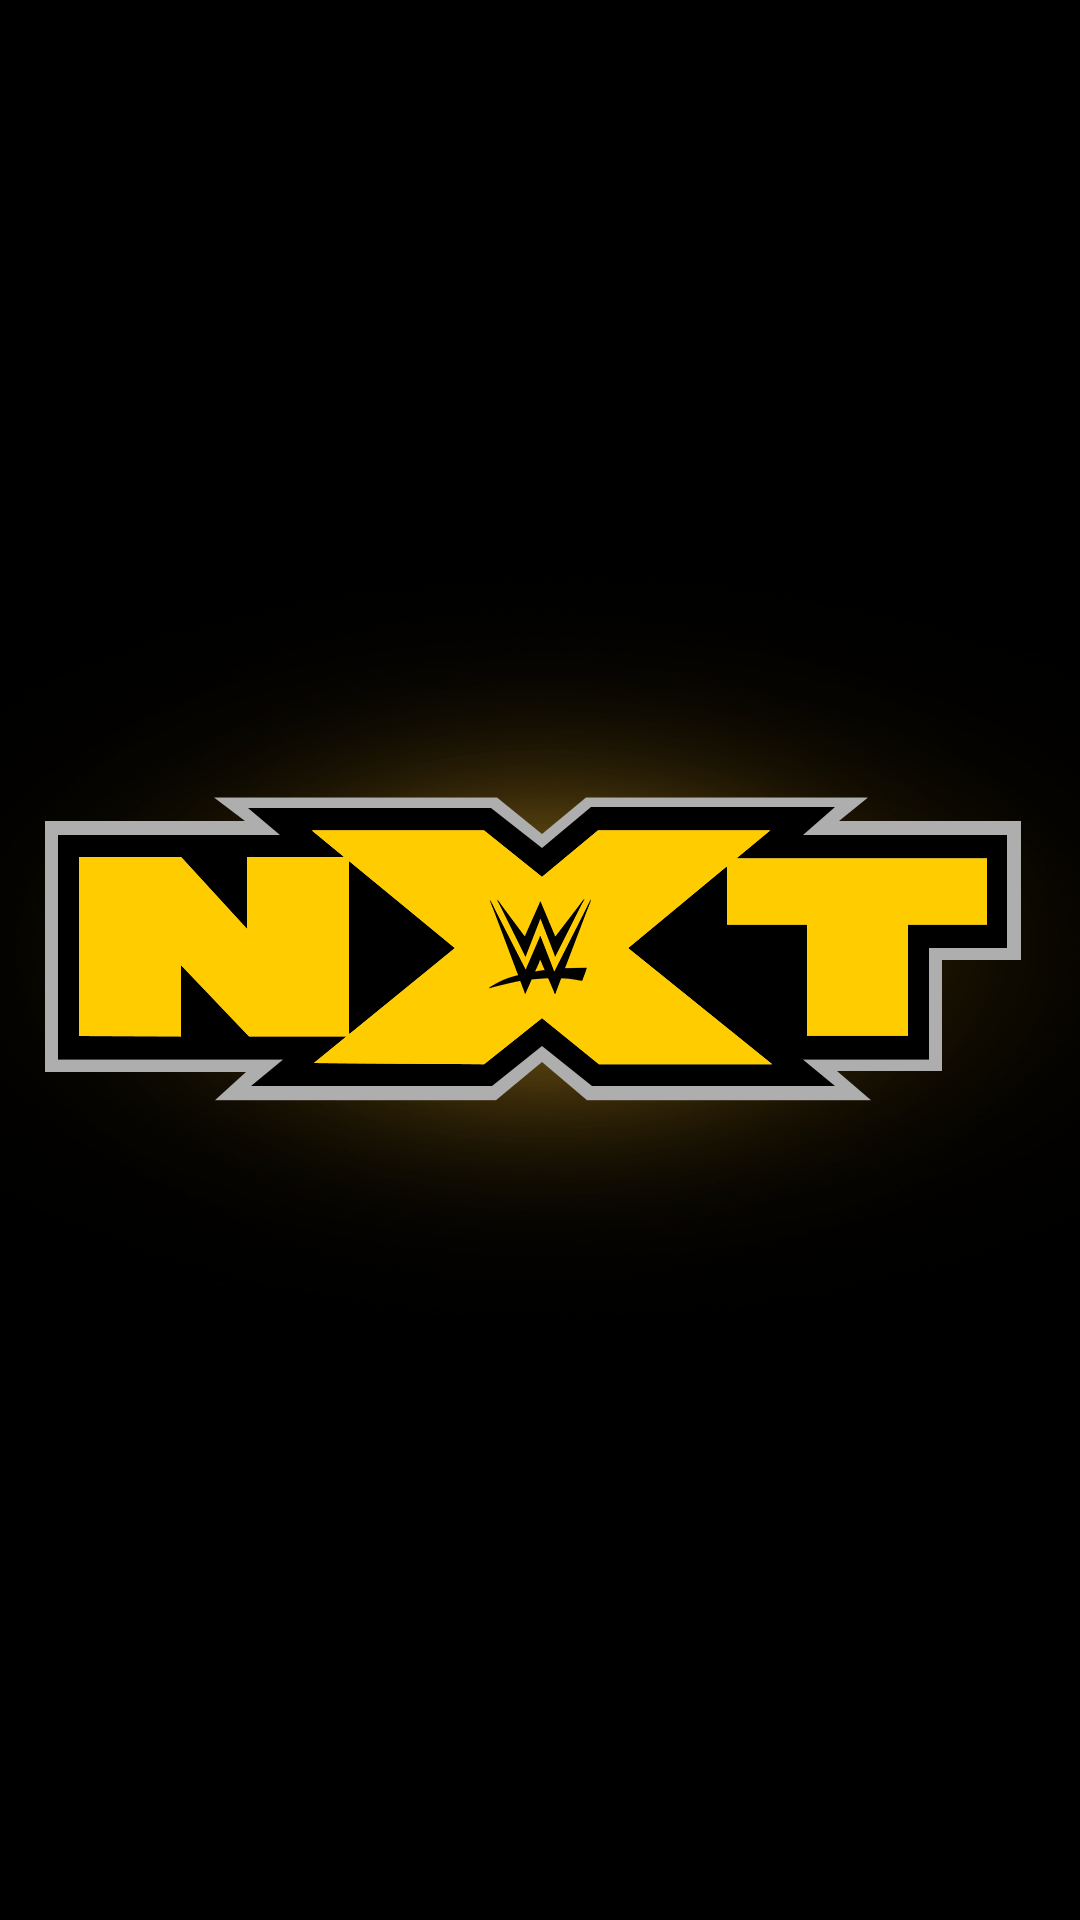 1080x1920 I Made Some Simple Smartphone Wallpaper For Smackdown Raw And Nxt If You Want More Of Them Just Tell Me